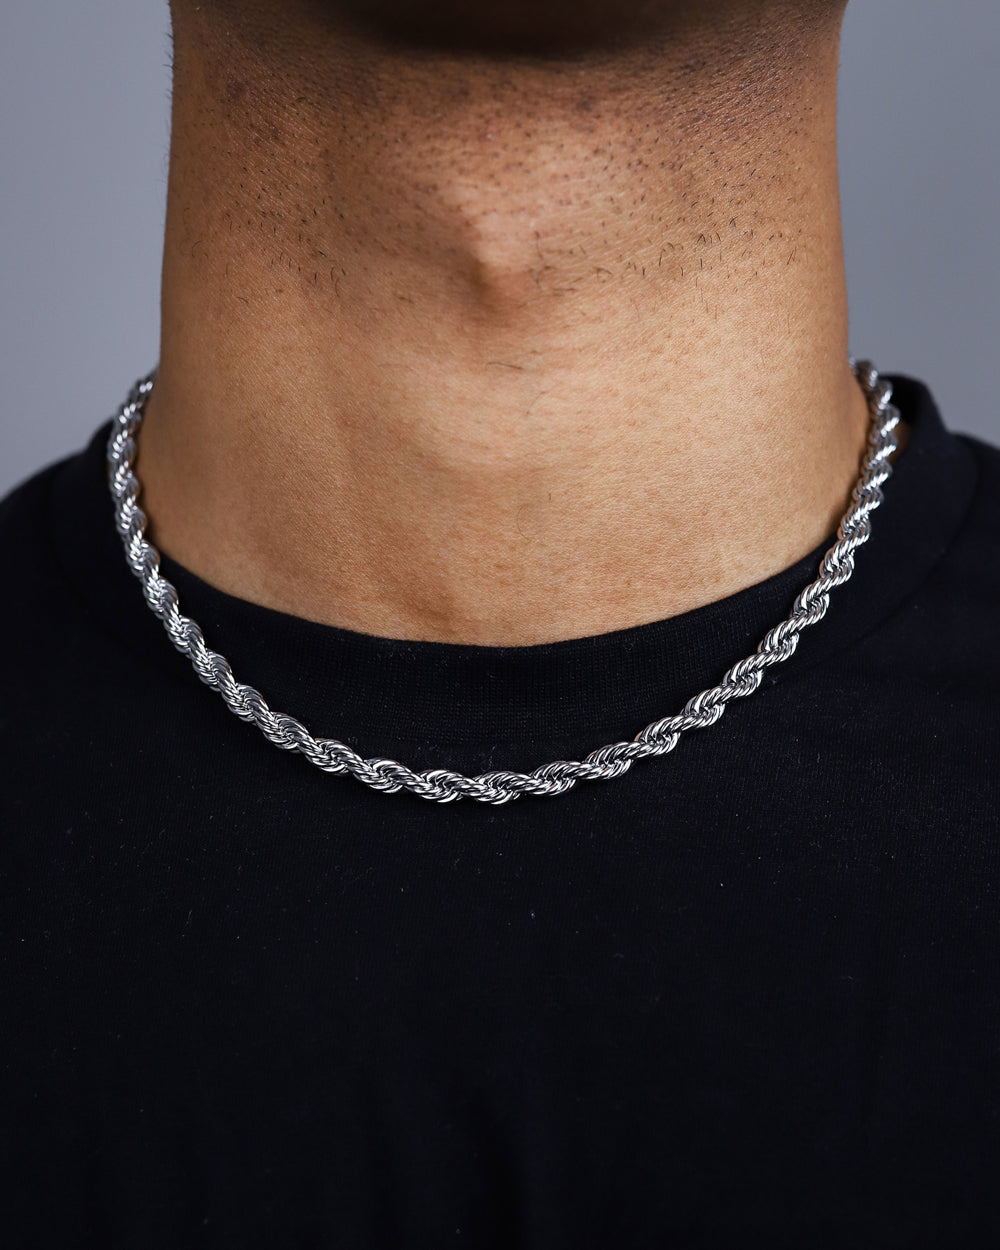 CLEAN ROPE CHAIN. - 6MM WHITE GOLD